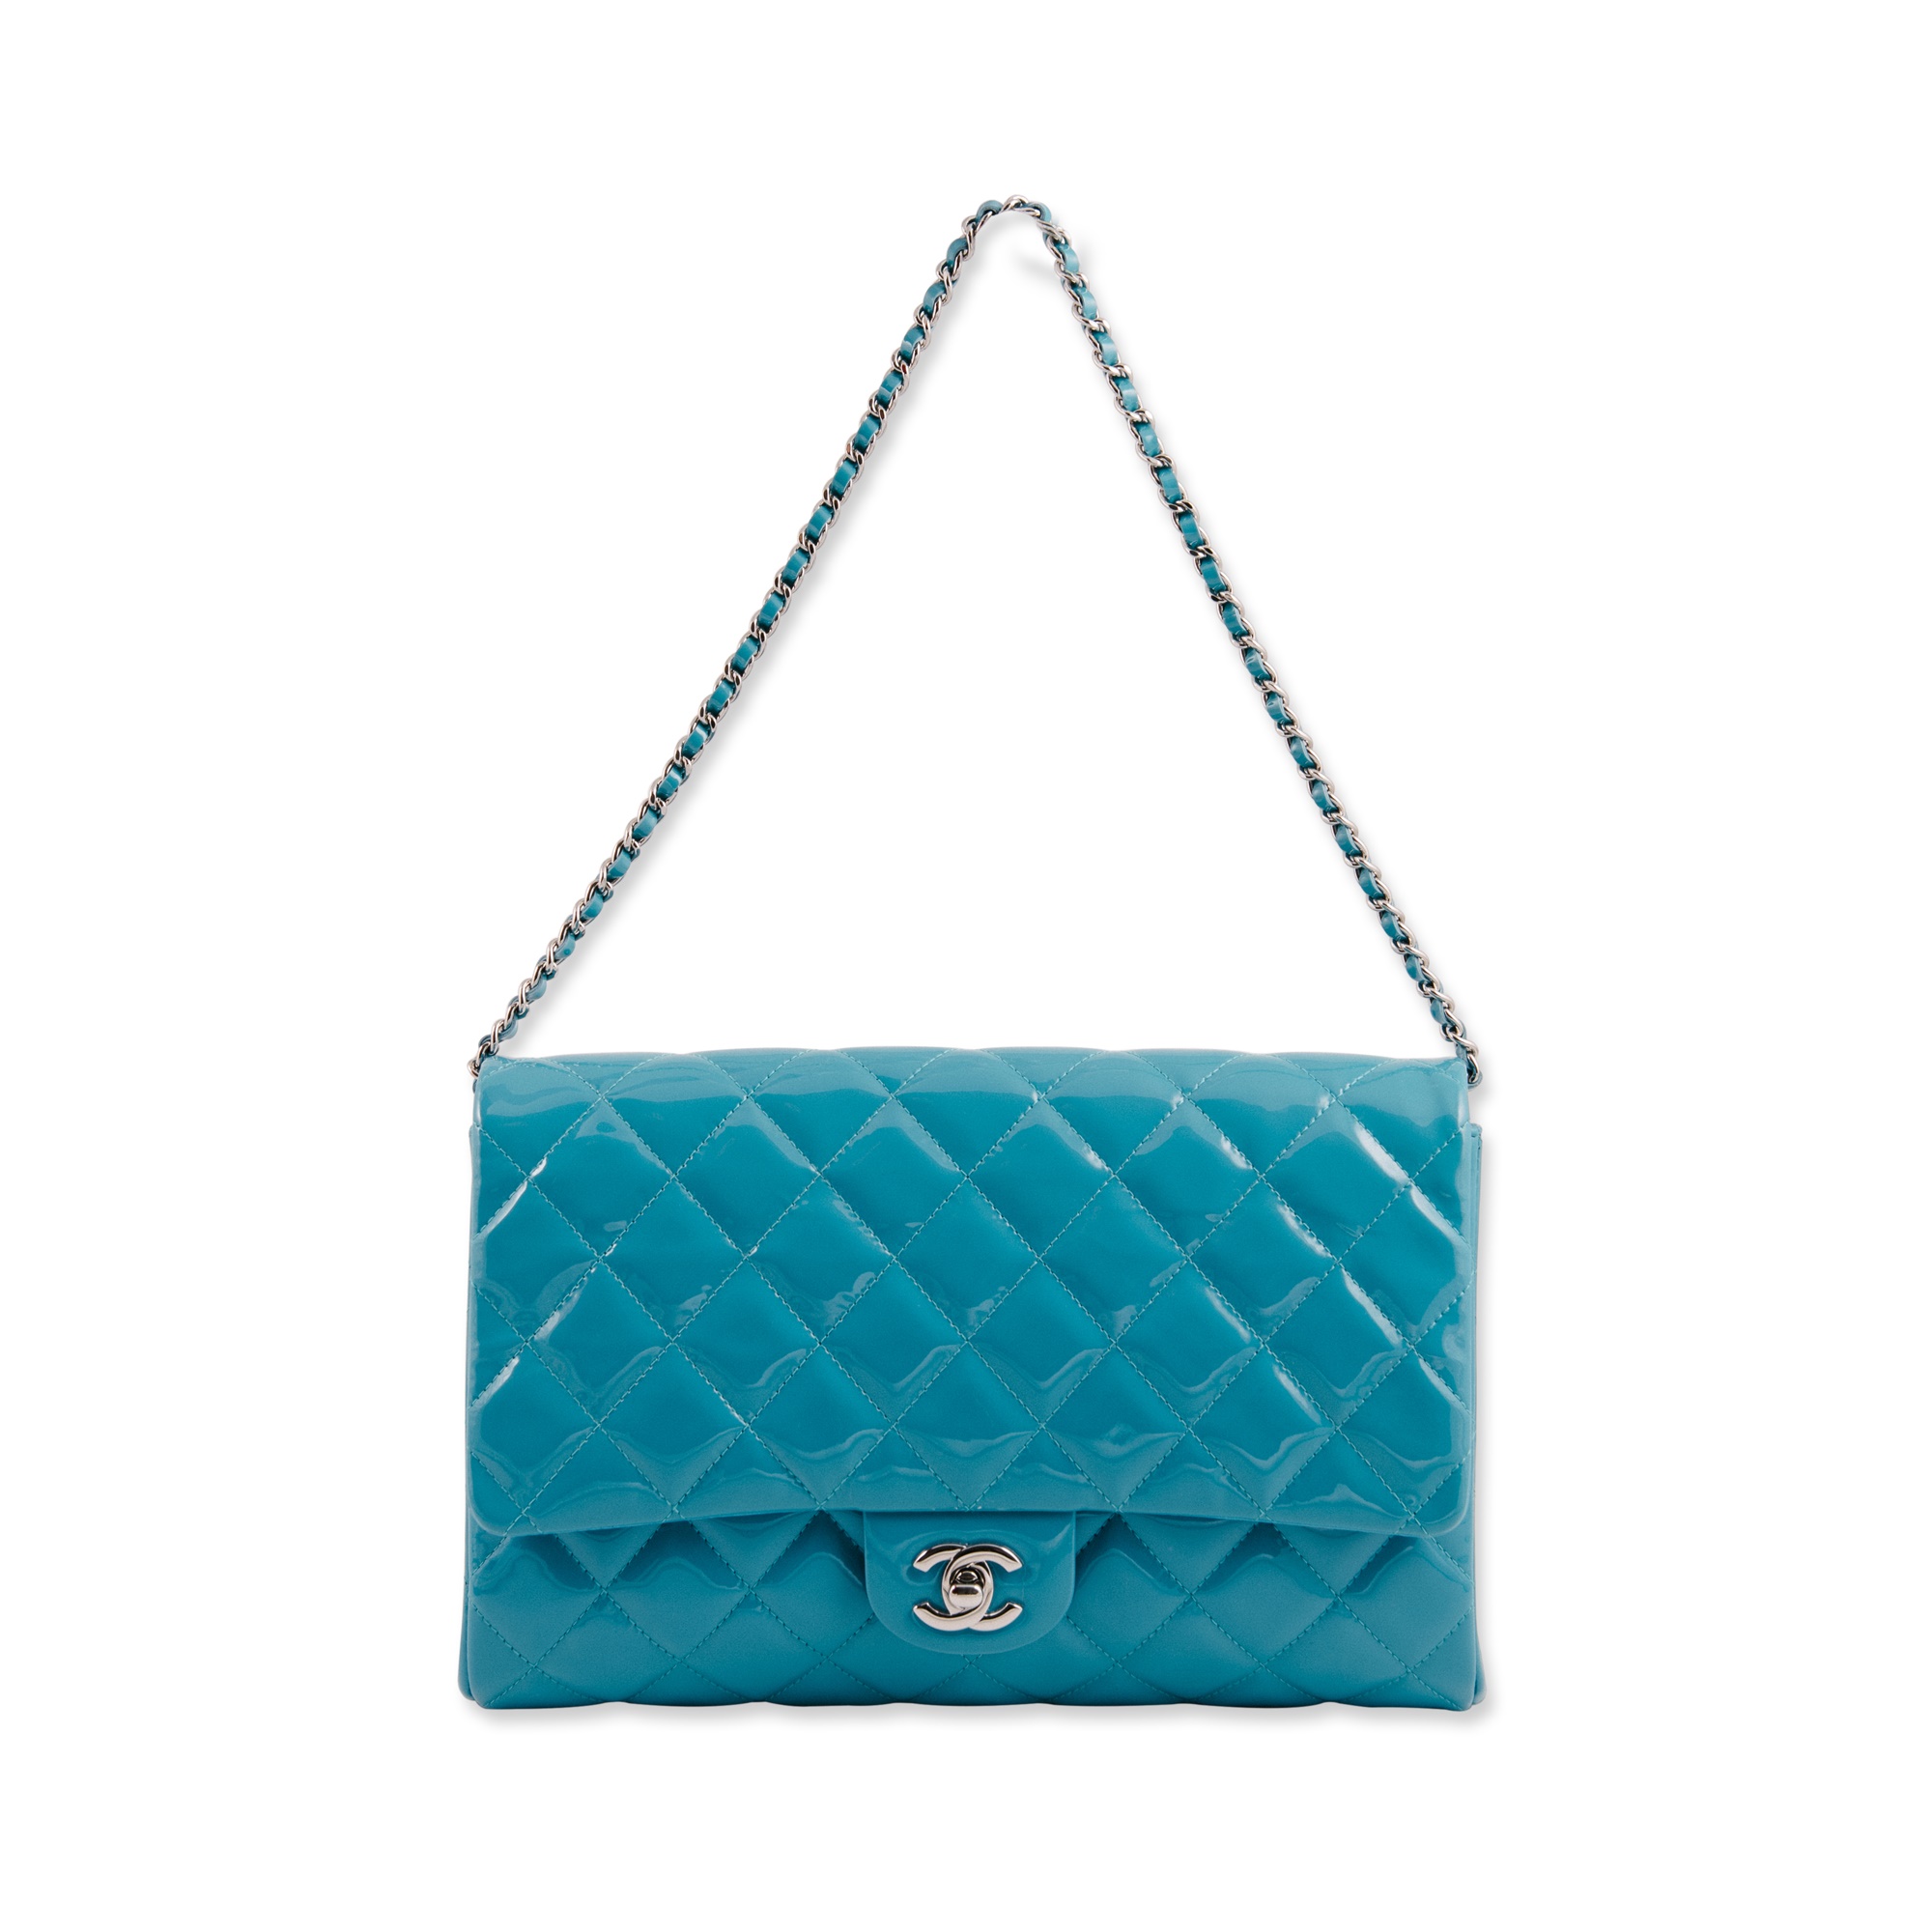 Chanel Turquoise Timeless Flap Clutch Bag